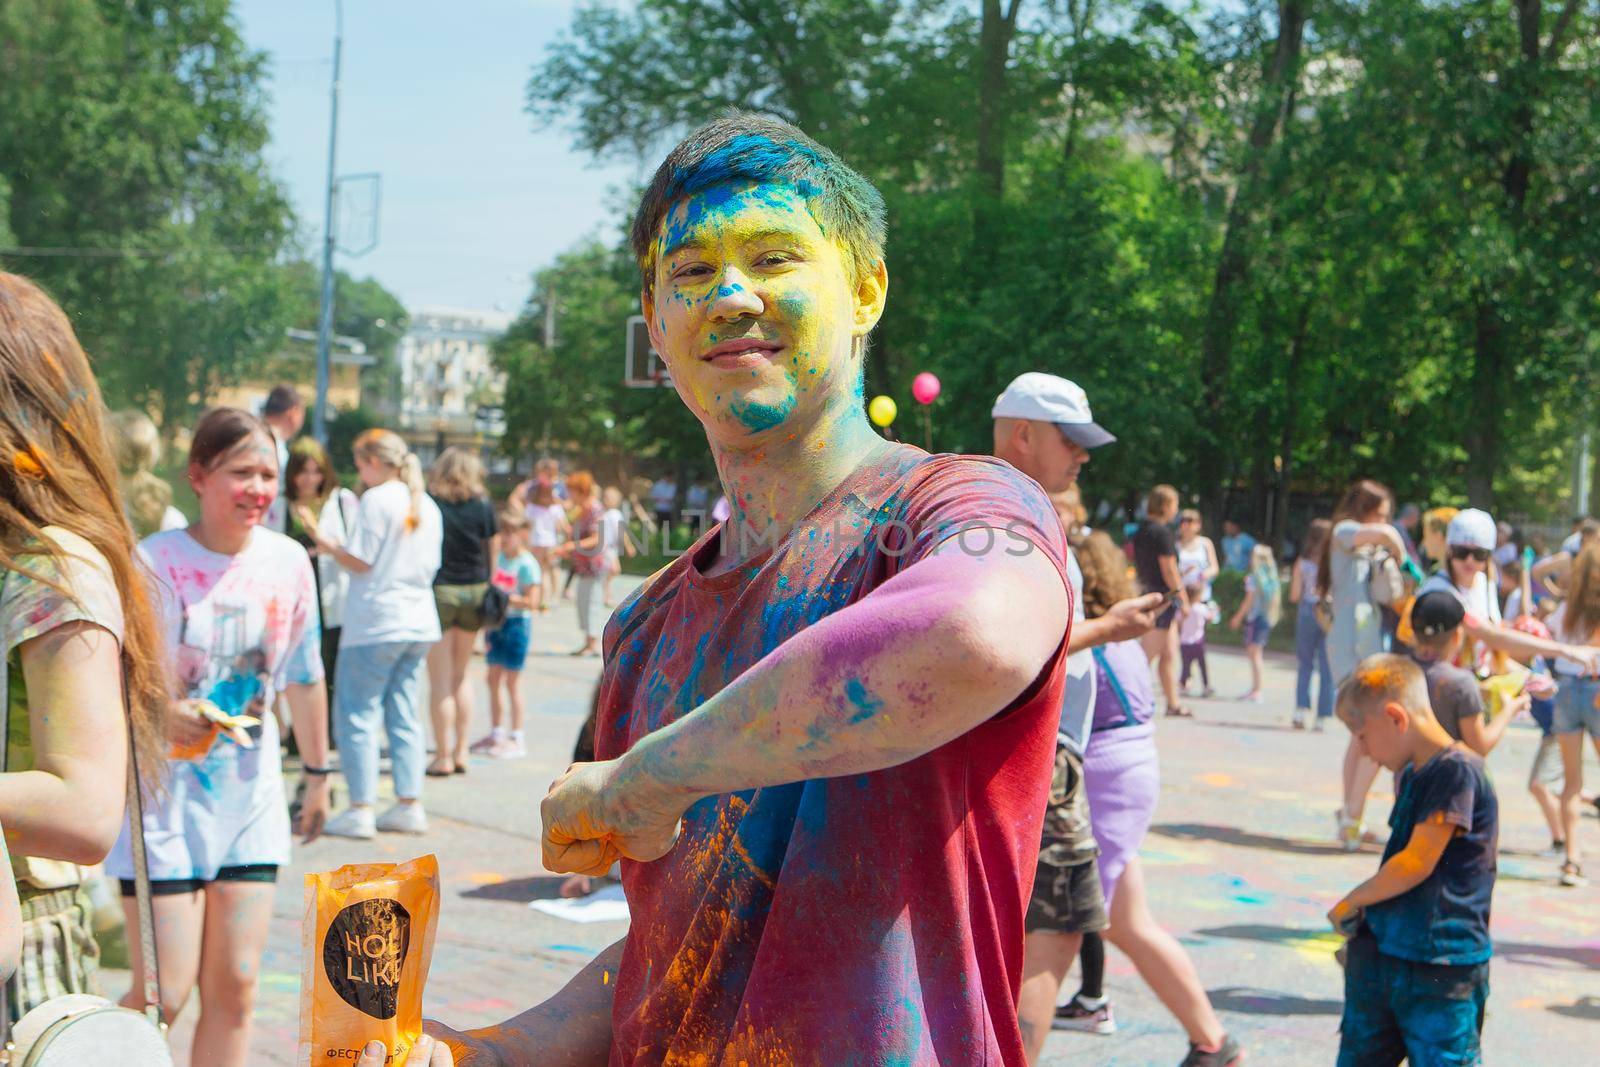 Novokuznetsk, Kemerovo region, Russia - June 12, 2022 :: Boy with colorful face painted with holi powder having fun outdoors.